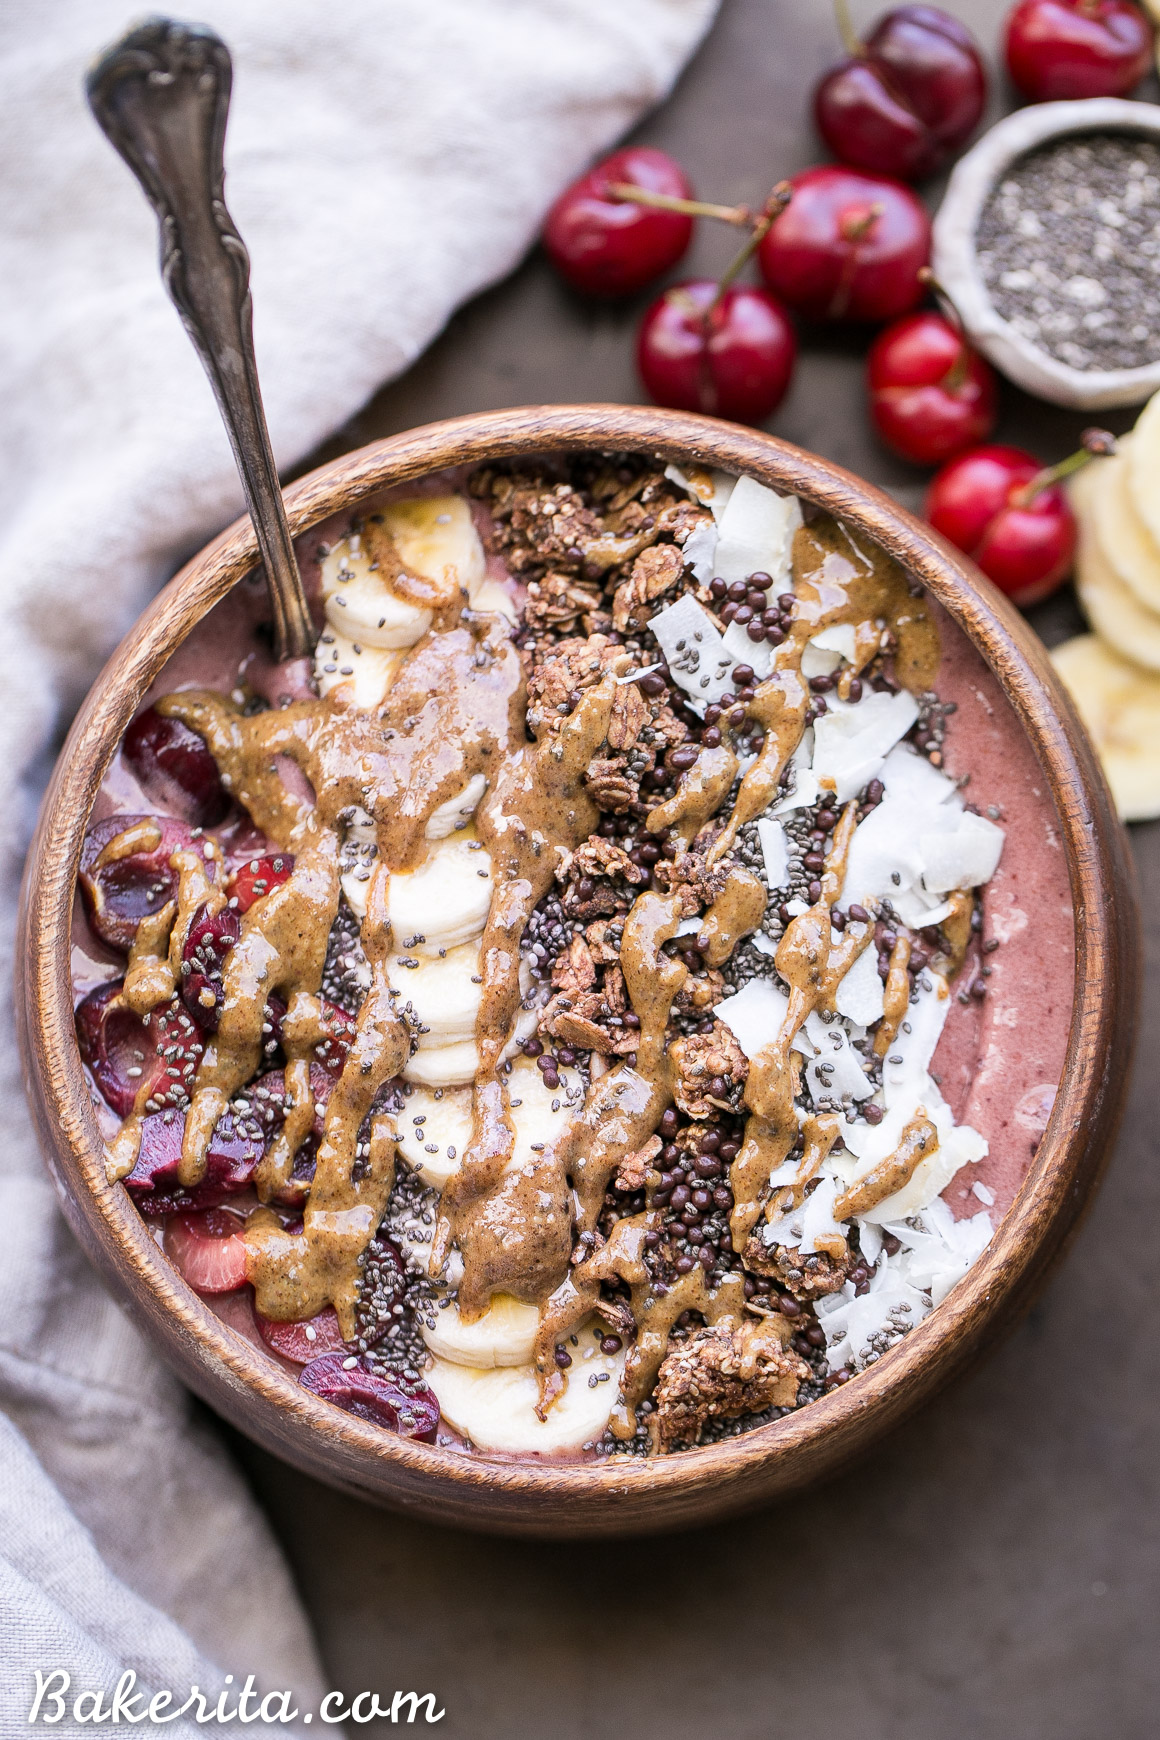 This Banana Cherry Smoothie Bowl is a healthy and delicious breakfast treat! It's refreshing, filling, and loaded with beautifying superfoods. Add all your favorite toppings for a treat suited just to your tastes.